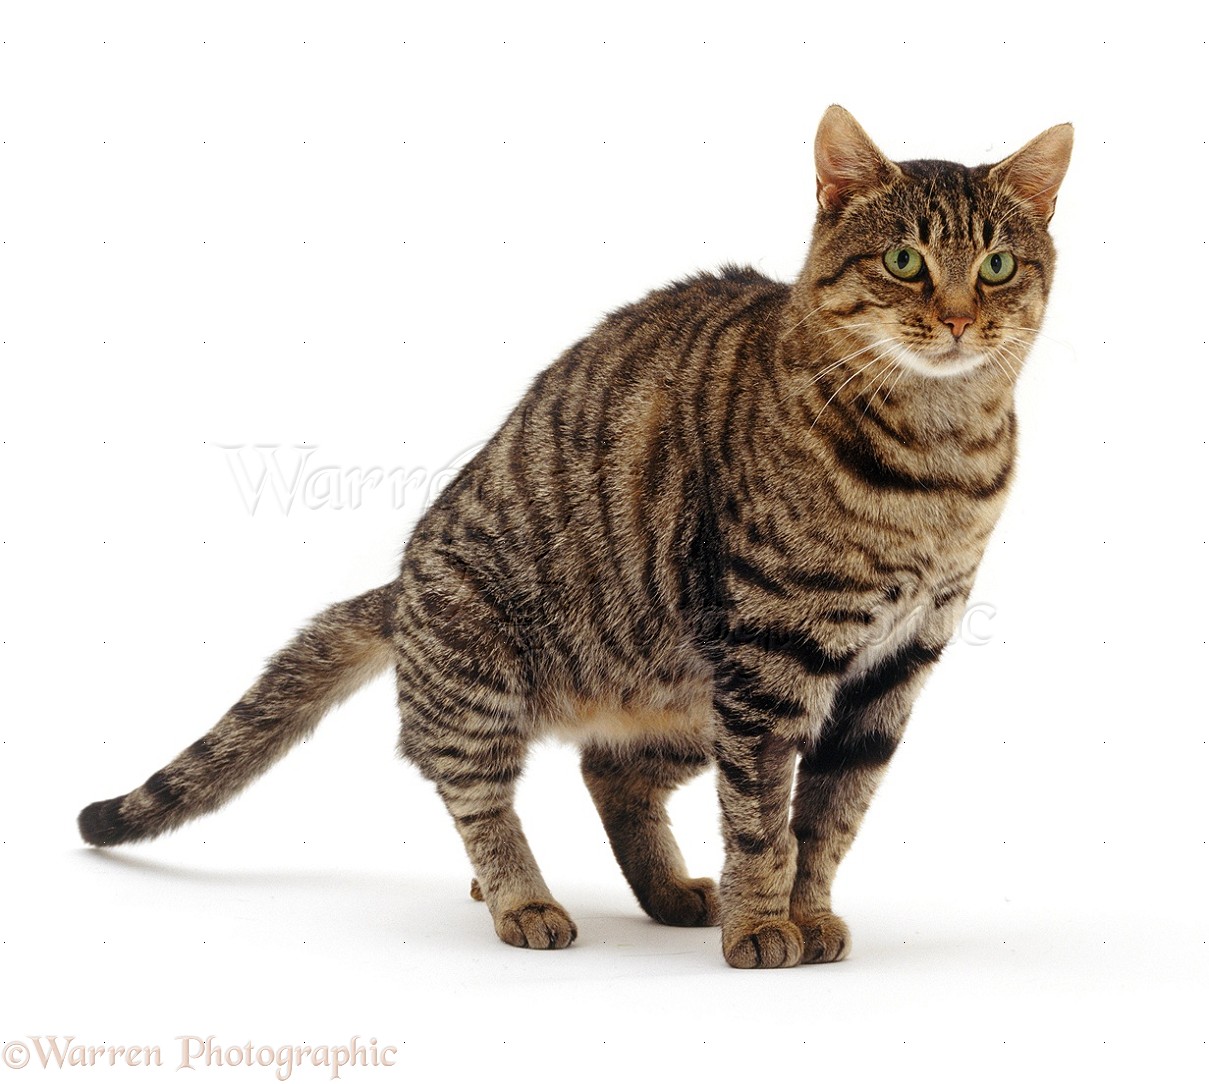 13247-Brown-tabby-cat-defecating-on-the-